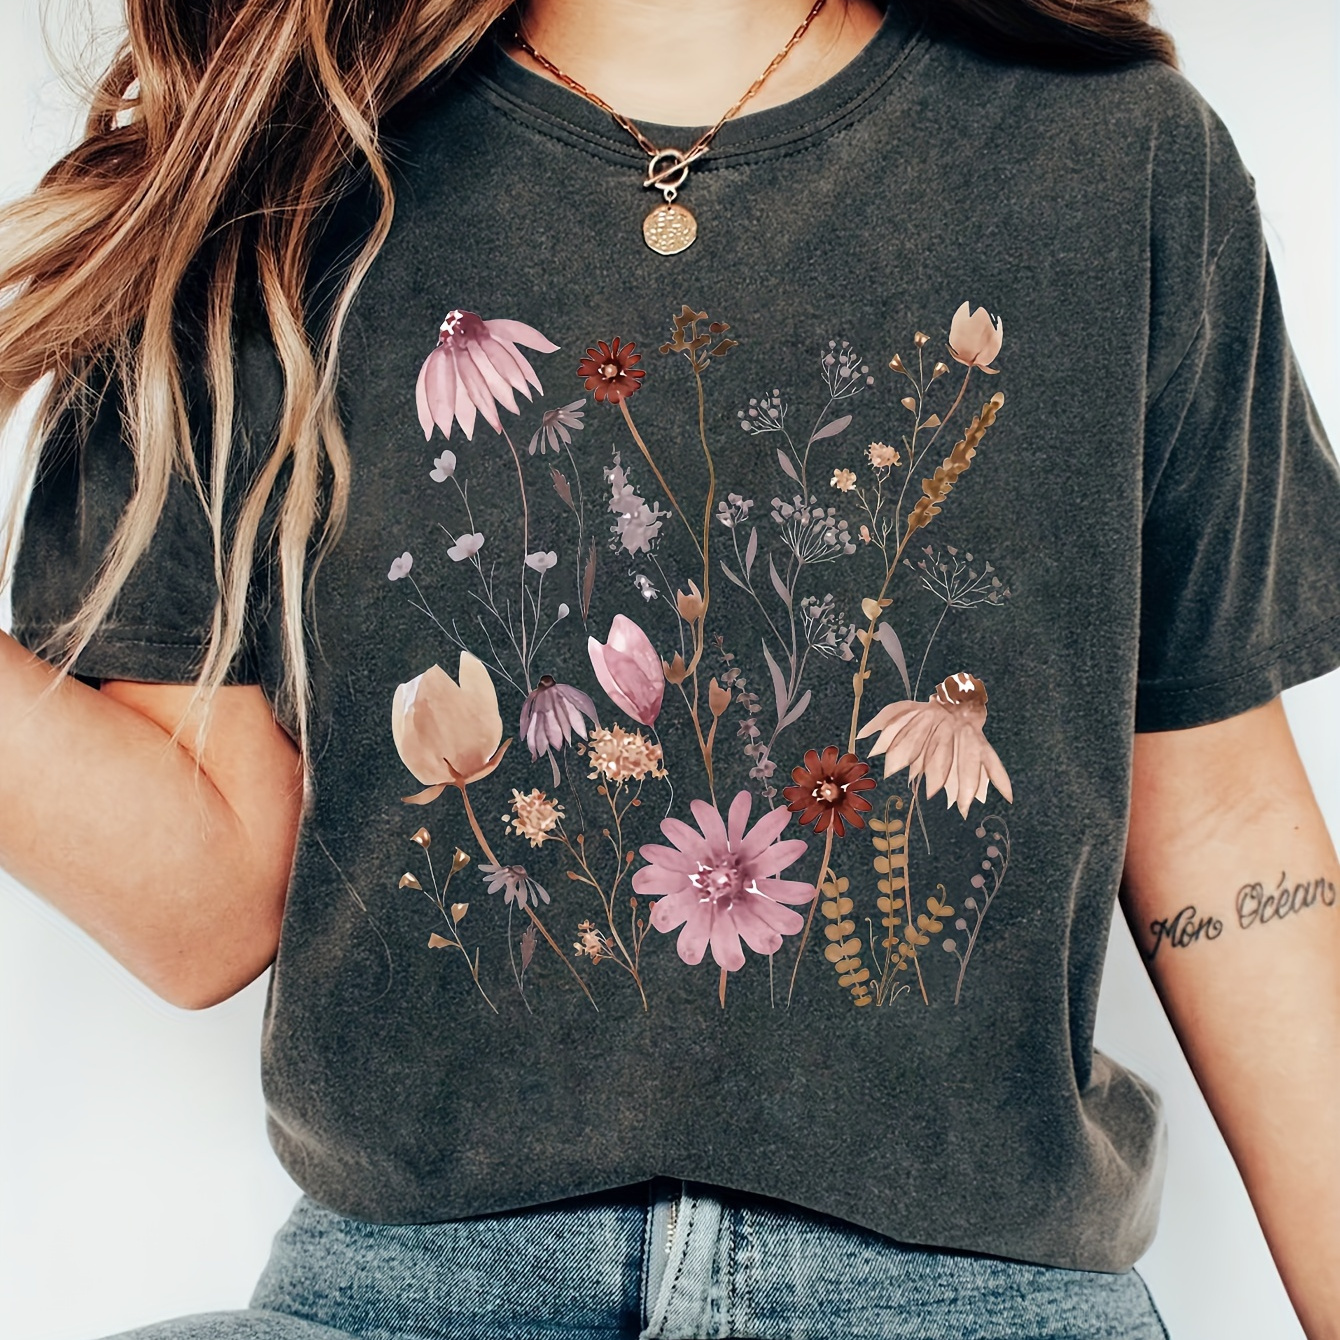 

Floral Print Crew Neck T-shirt, Short Sleeve Casual Top For Spring & Summer, Women's Clothing